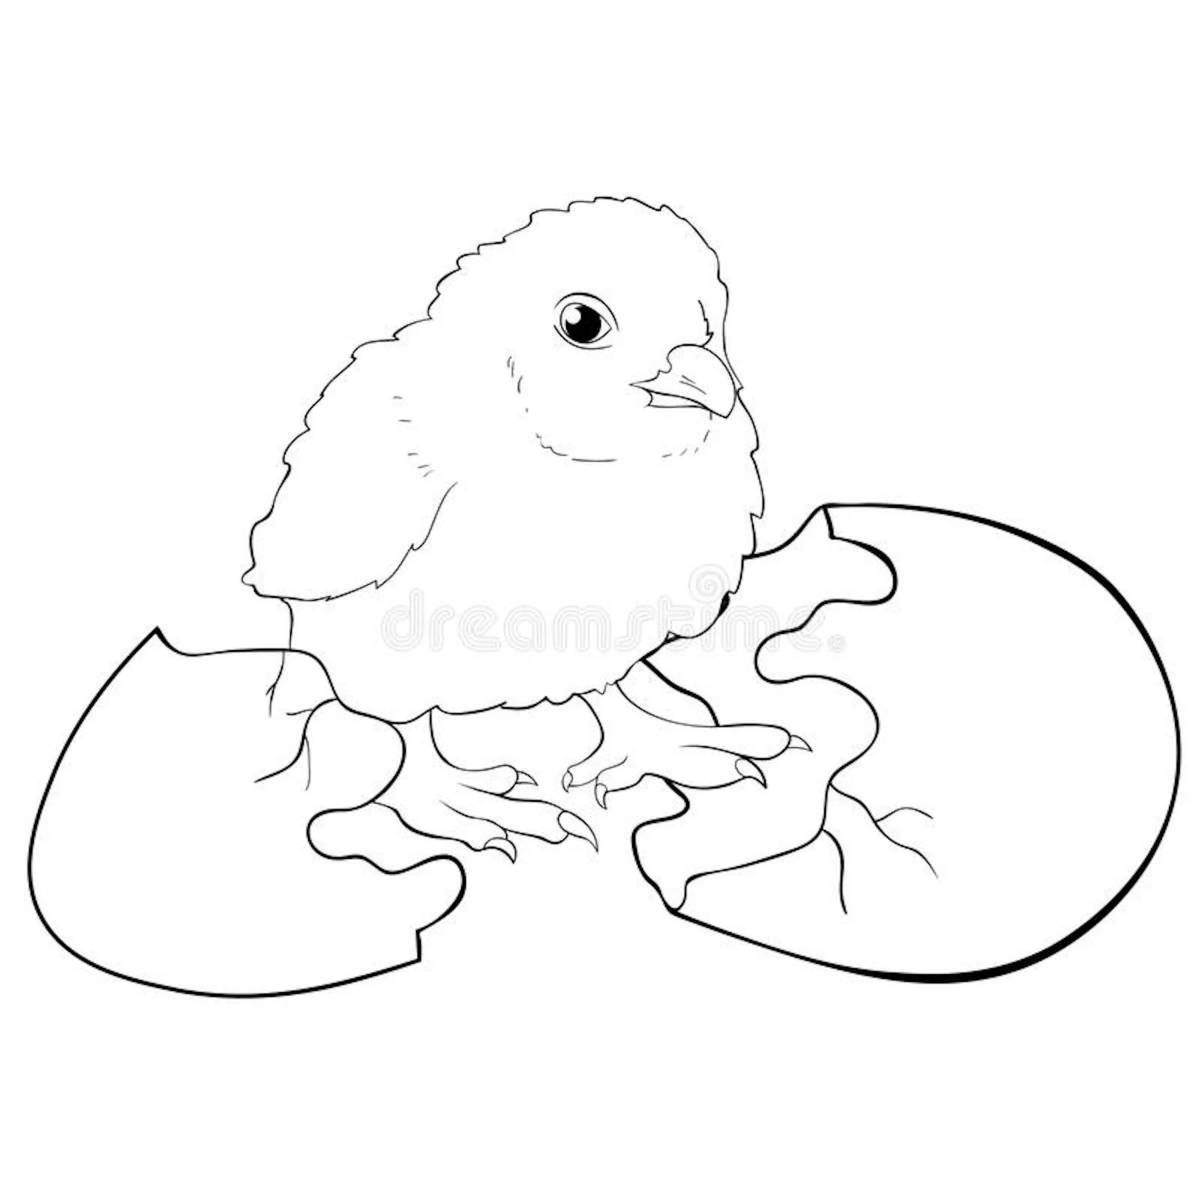 Chicken in egg coloring page